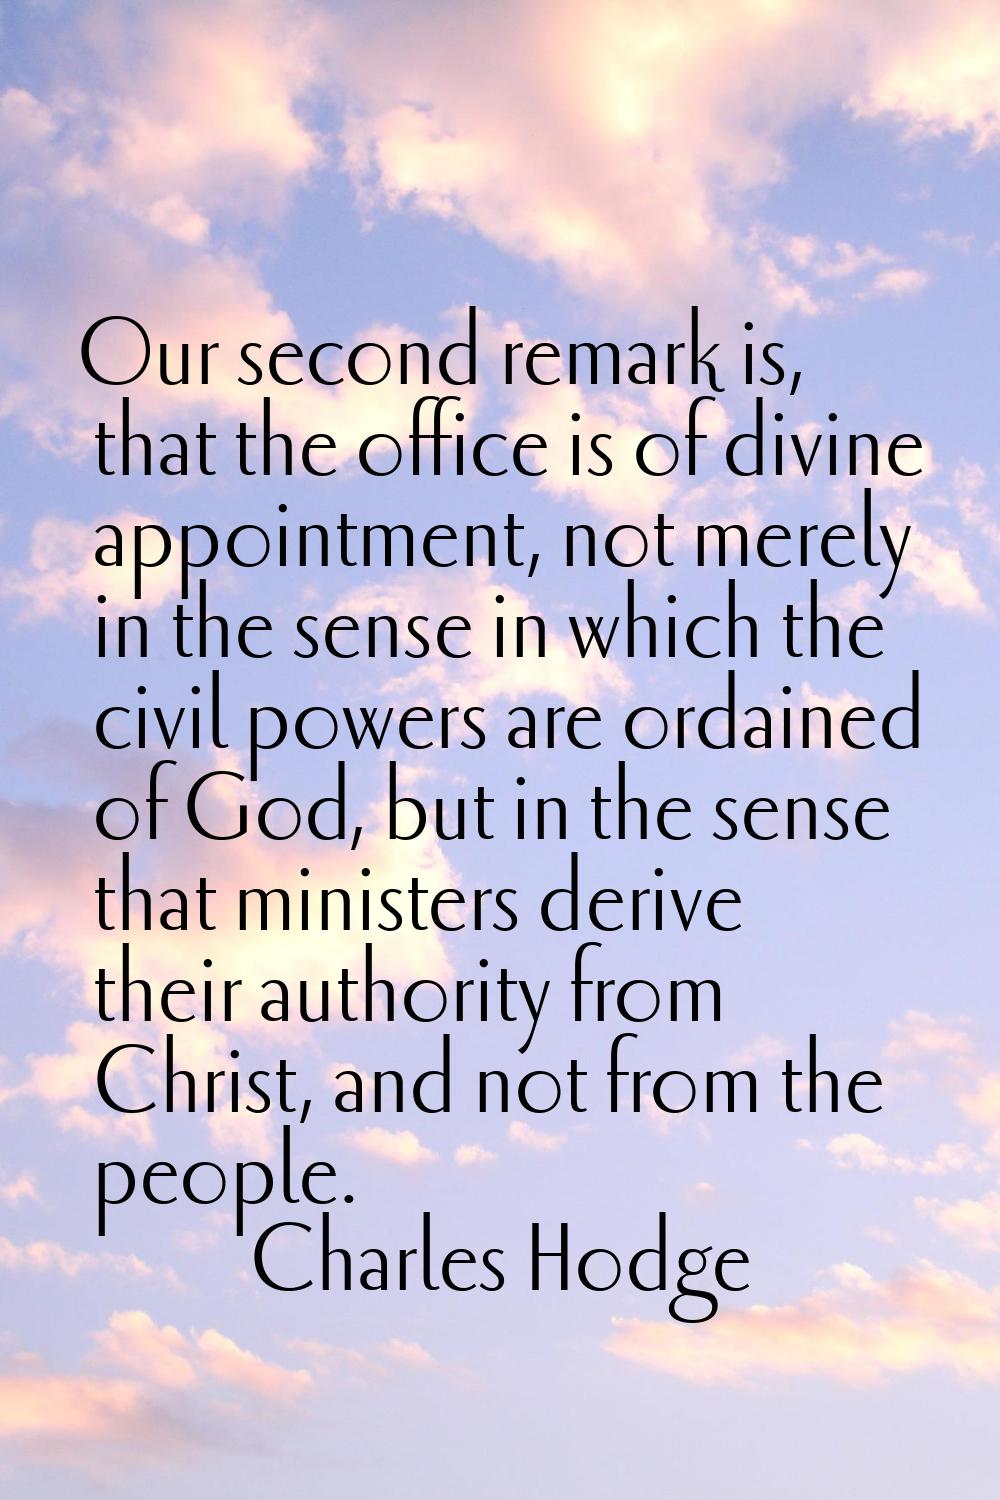 Our second remark is, that the office is of divine appointment, not merely in the sense in which th